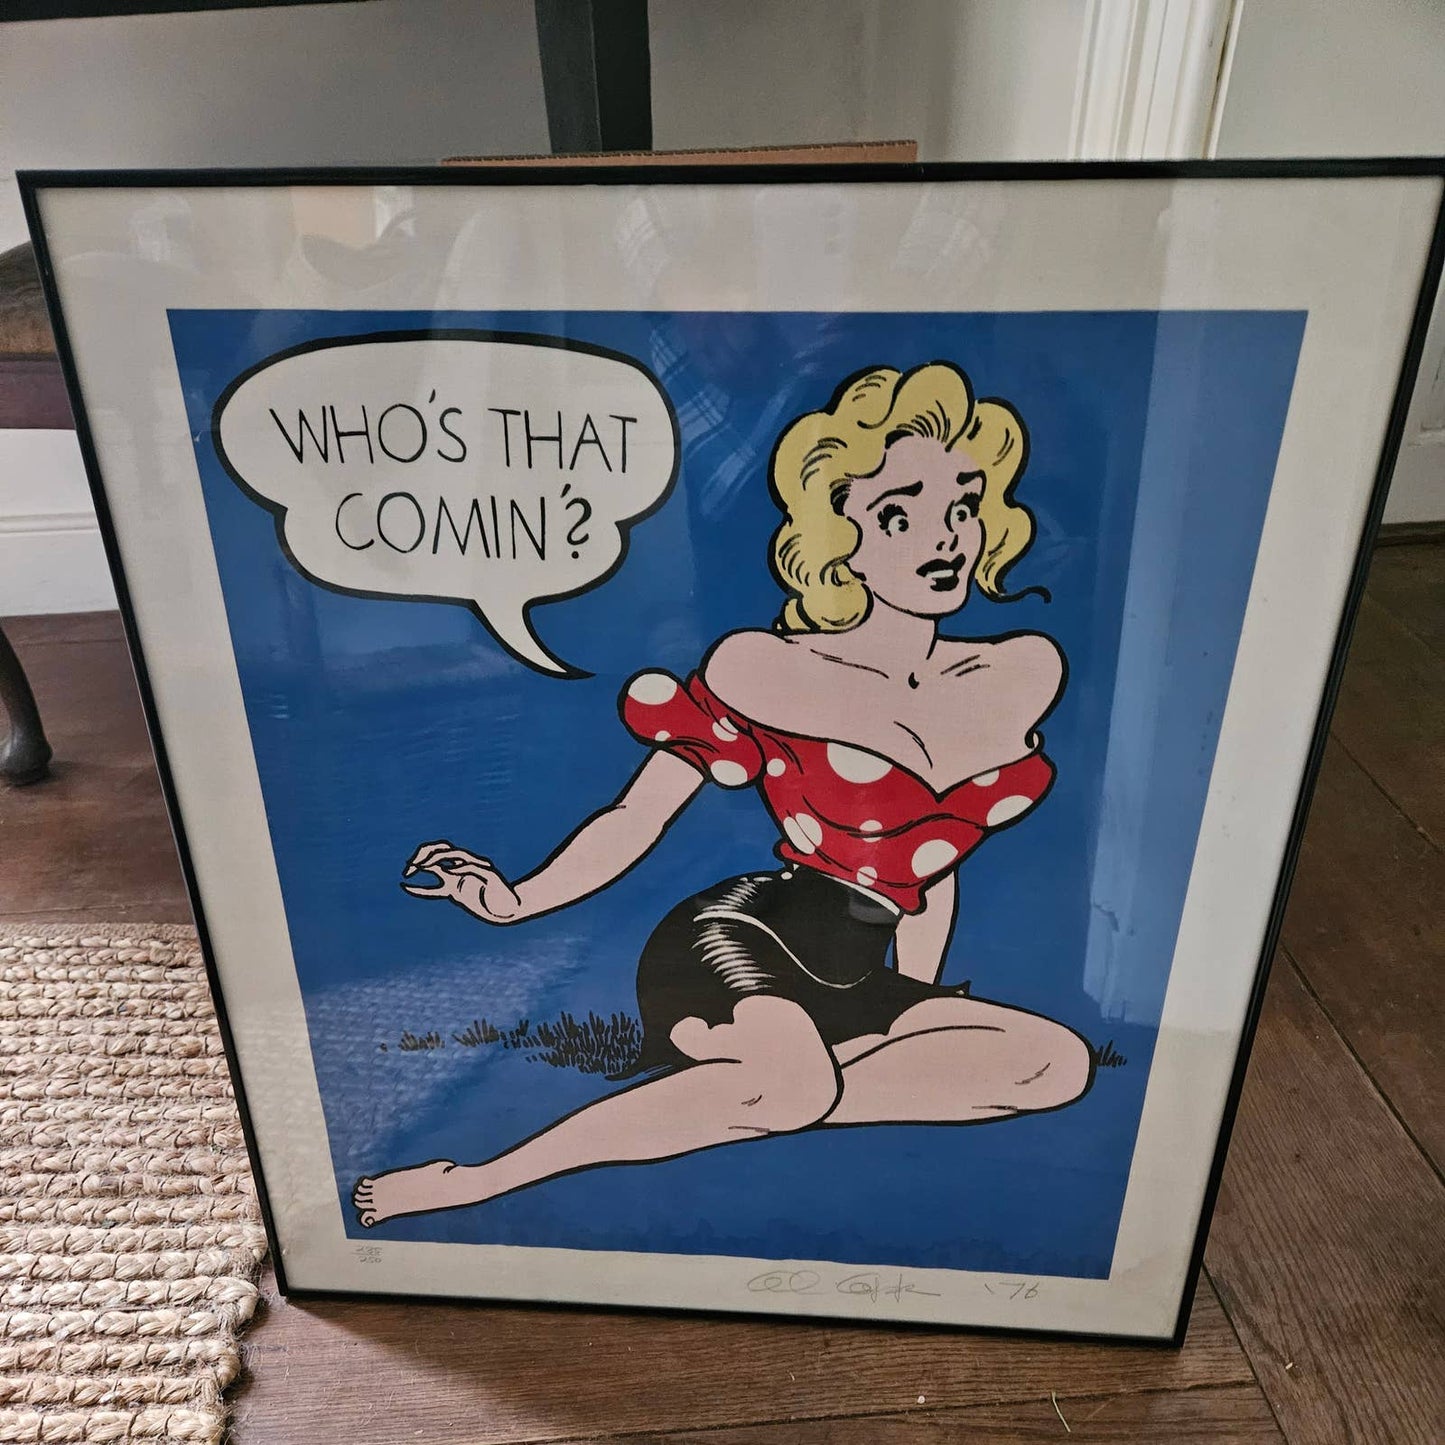 "Who's That Comin'?" Print by Al Capp